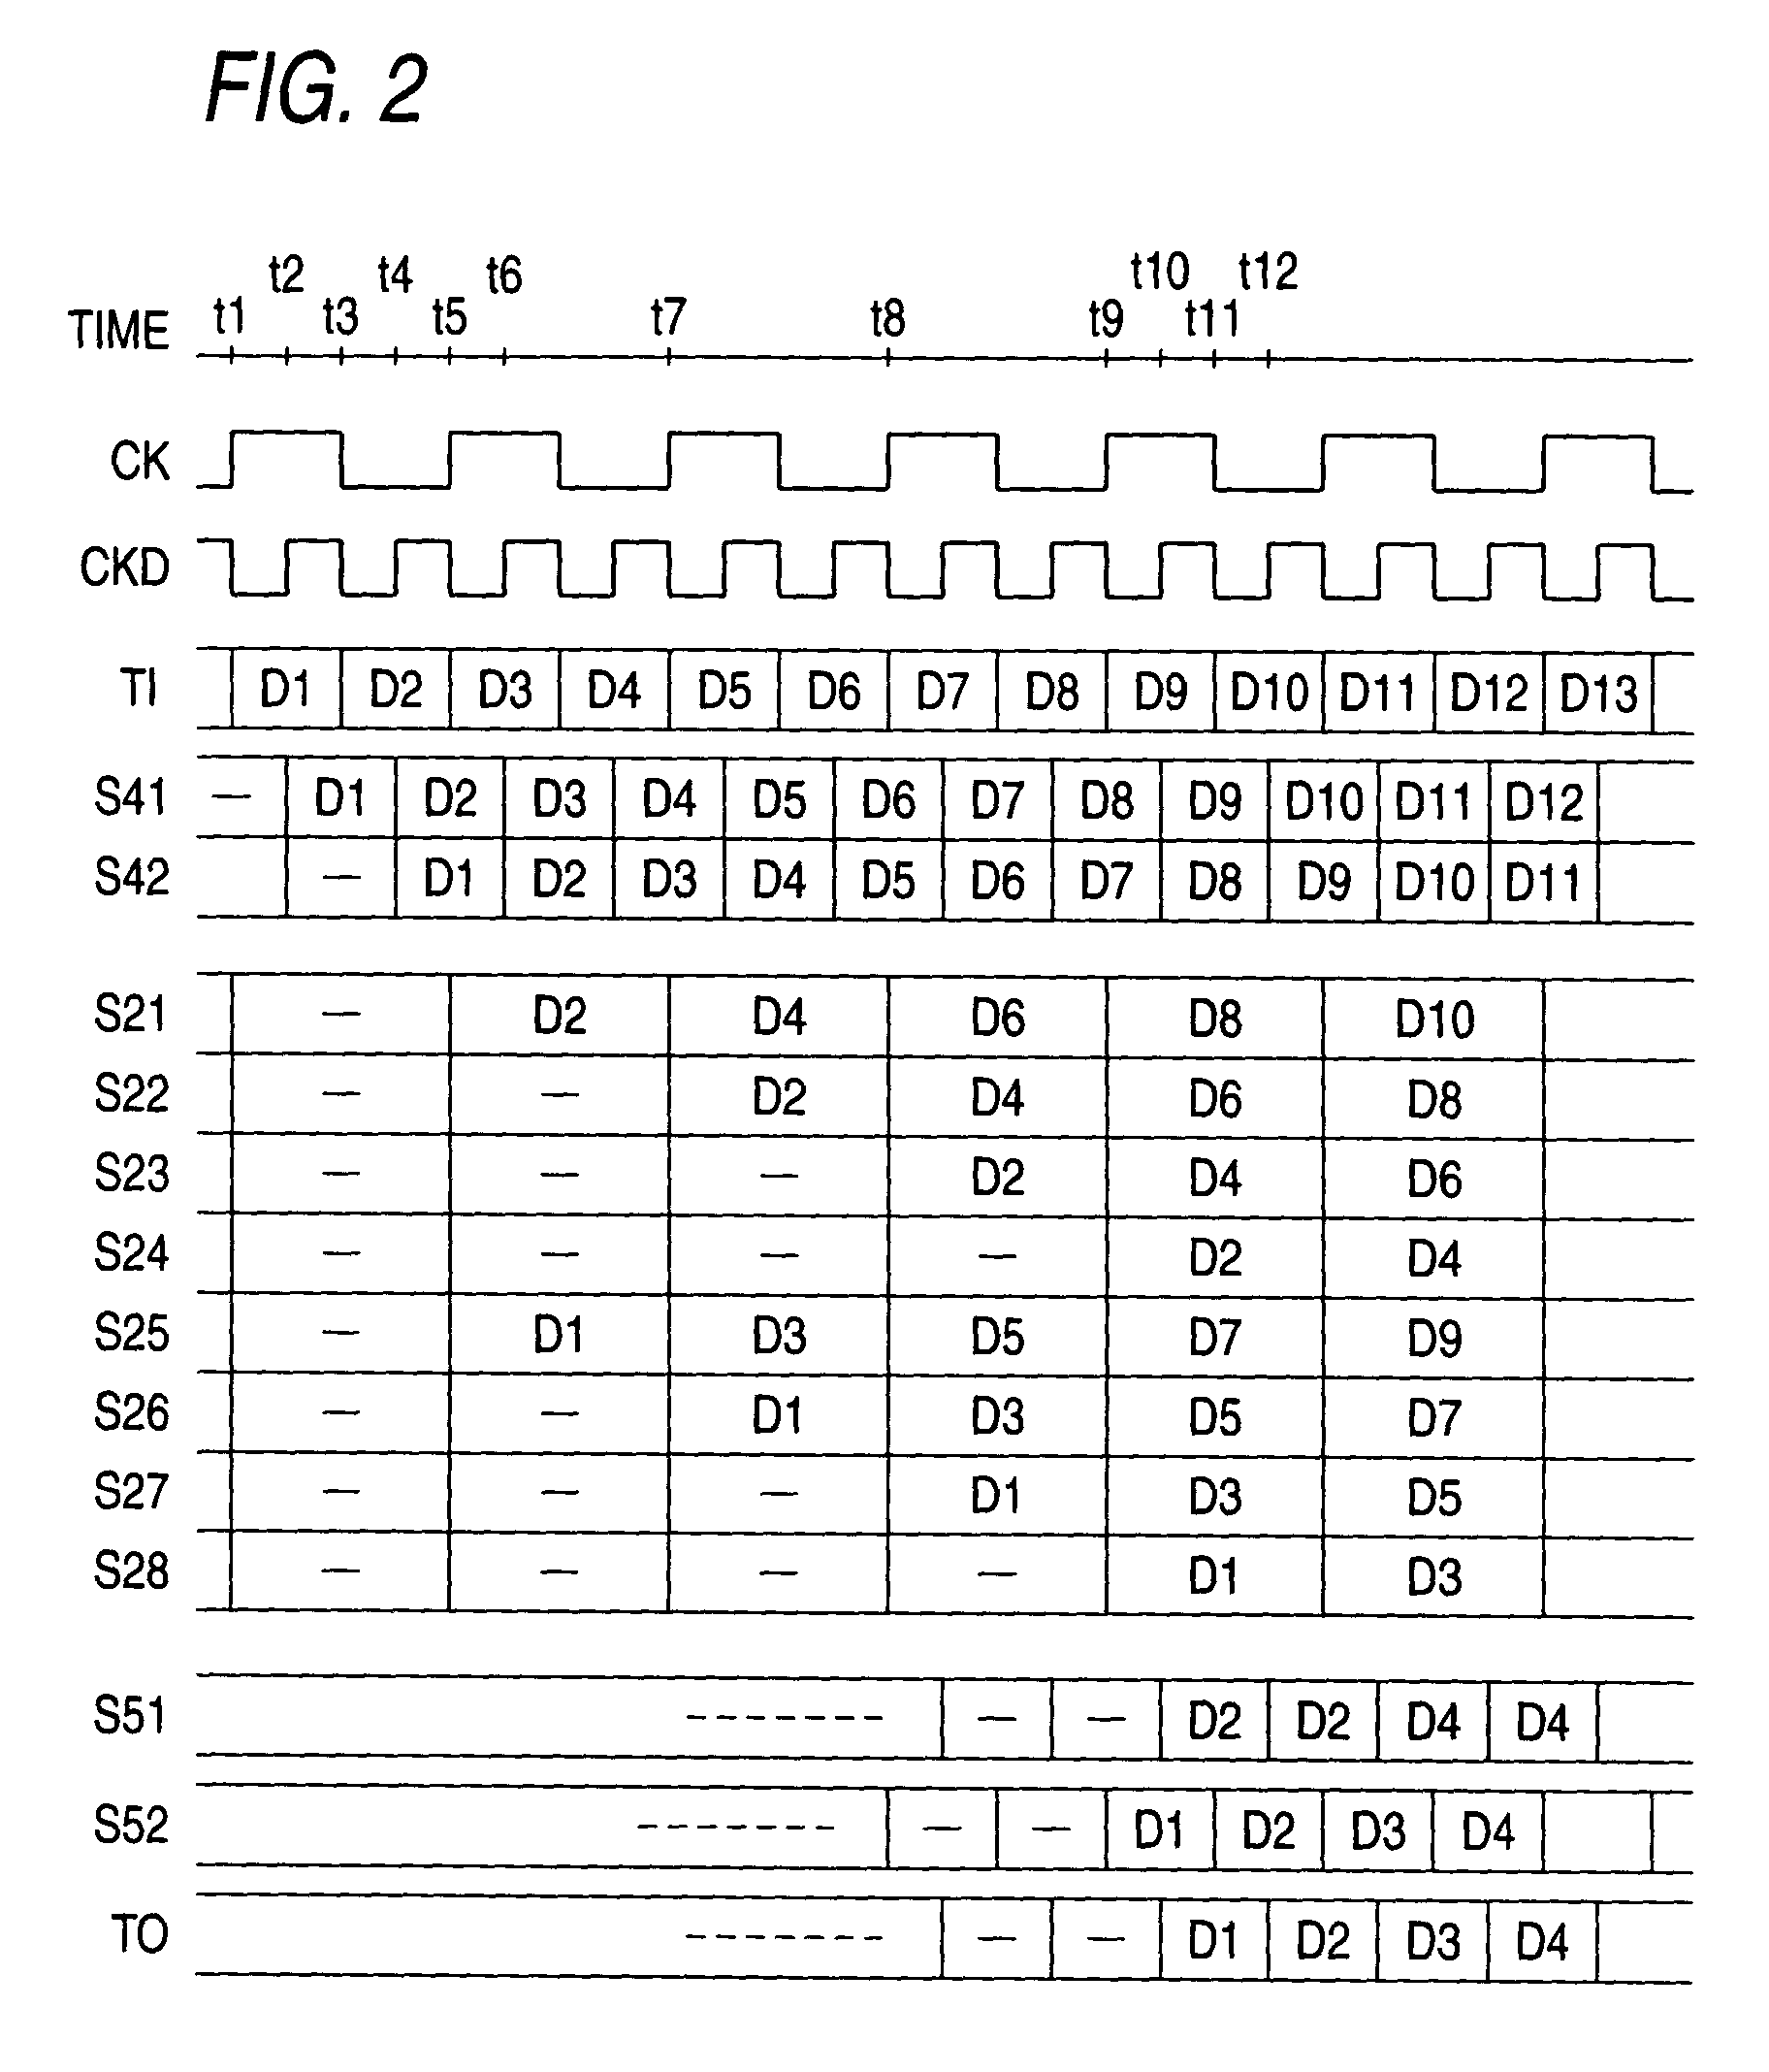 Semiconductor integrated circuit with a test circuit